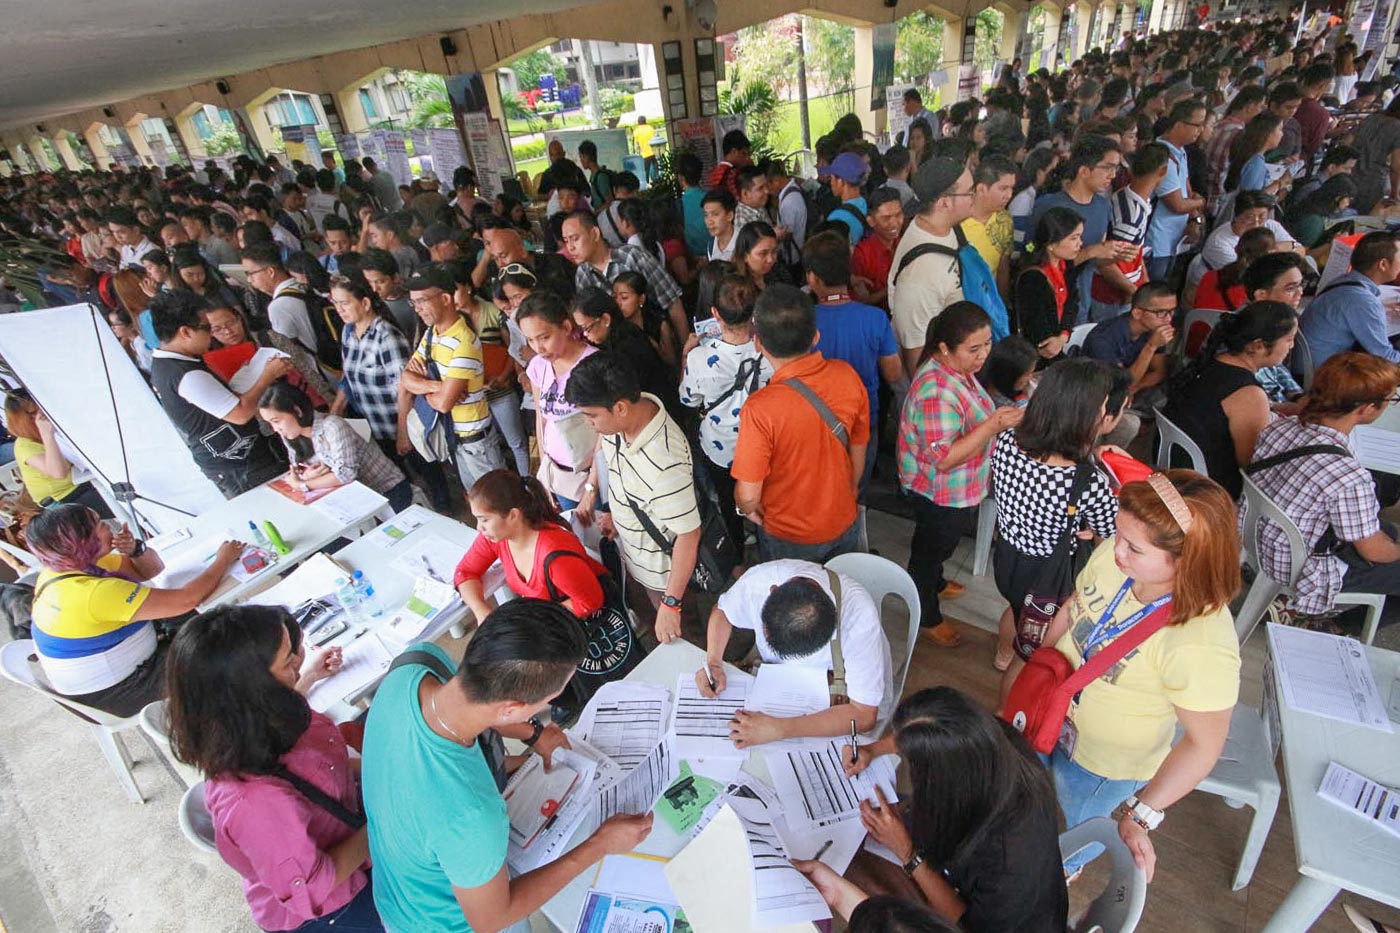 LABOR DAY. Thousands of job seekers troop to the Quezon City Hall on Labor Day to seek work opportunities at a DOLE job fair. File photo by Darren Langit/Rappler 